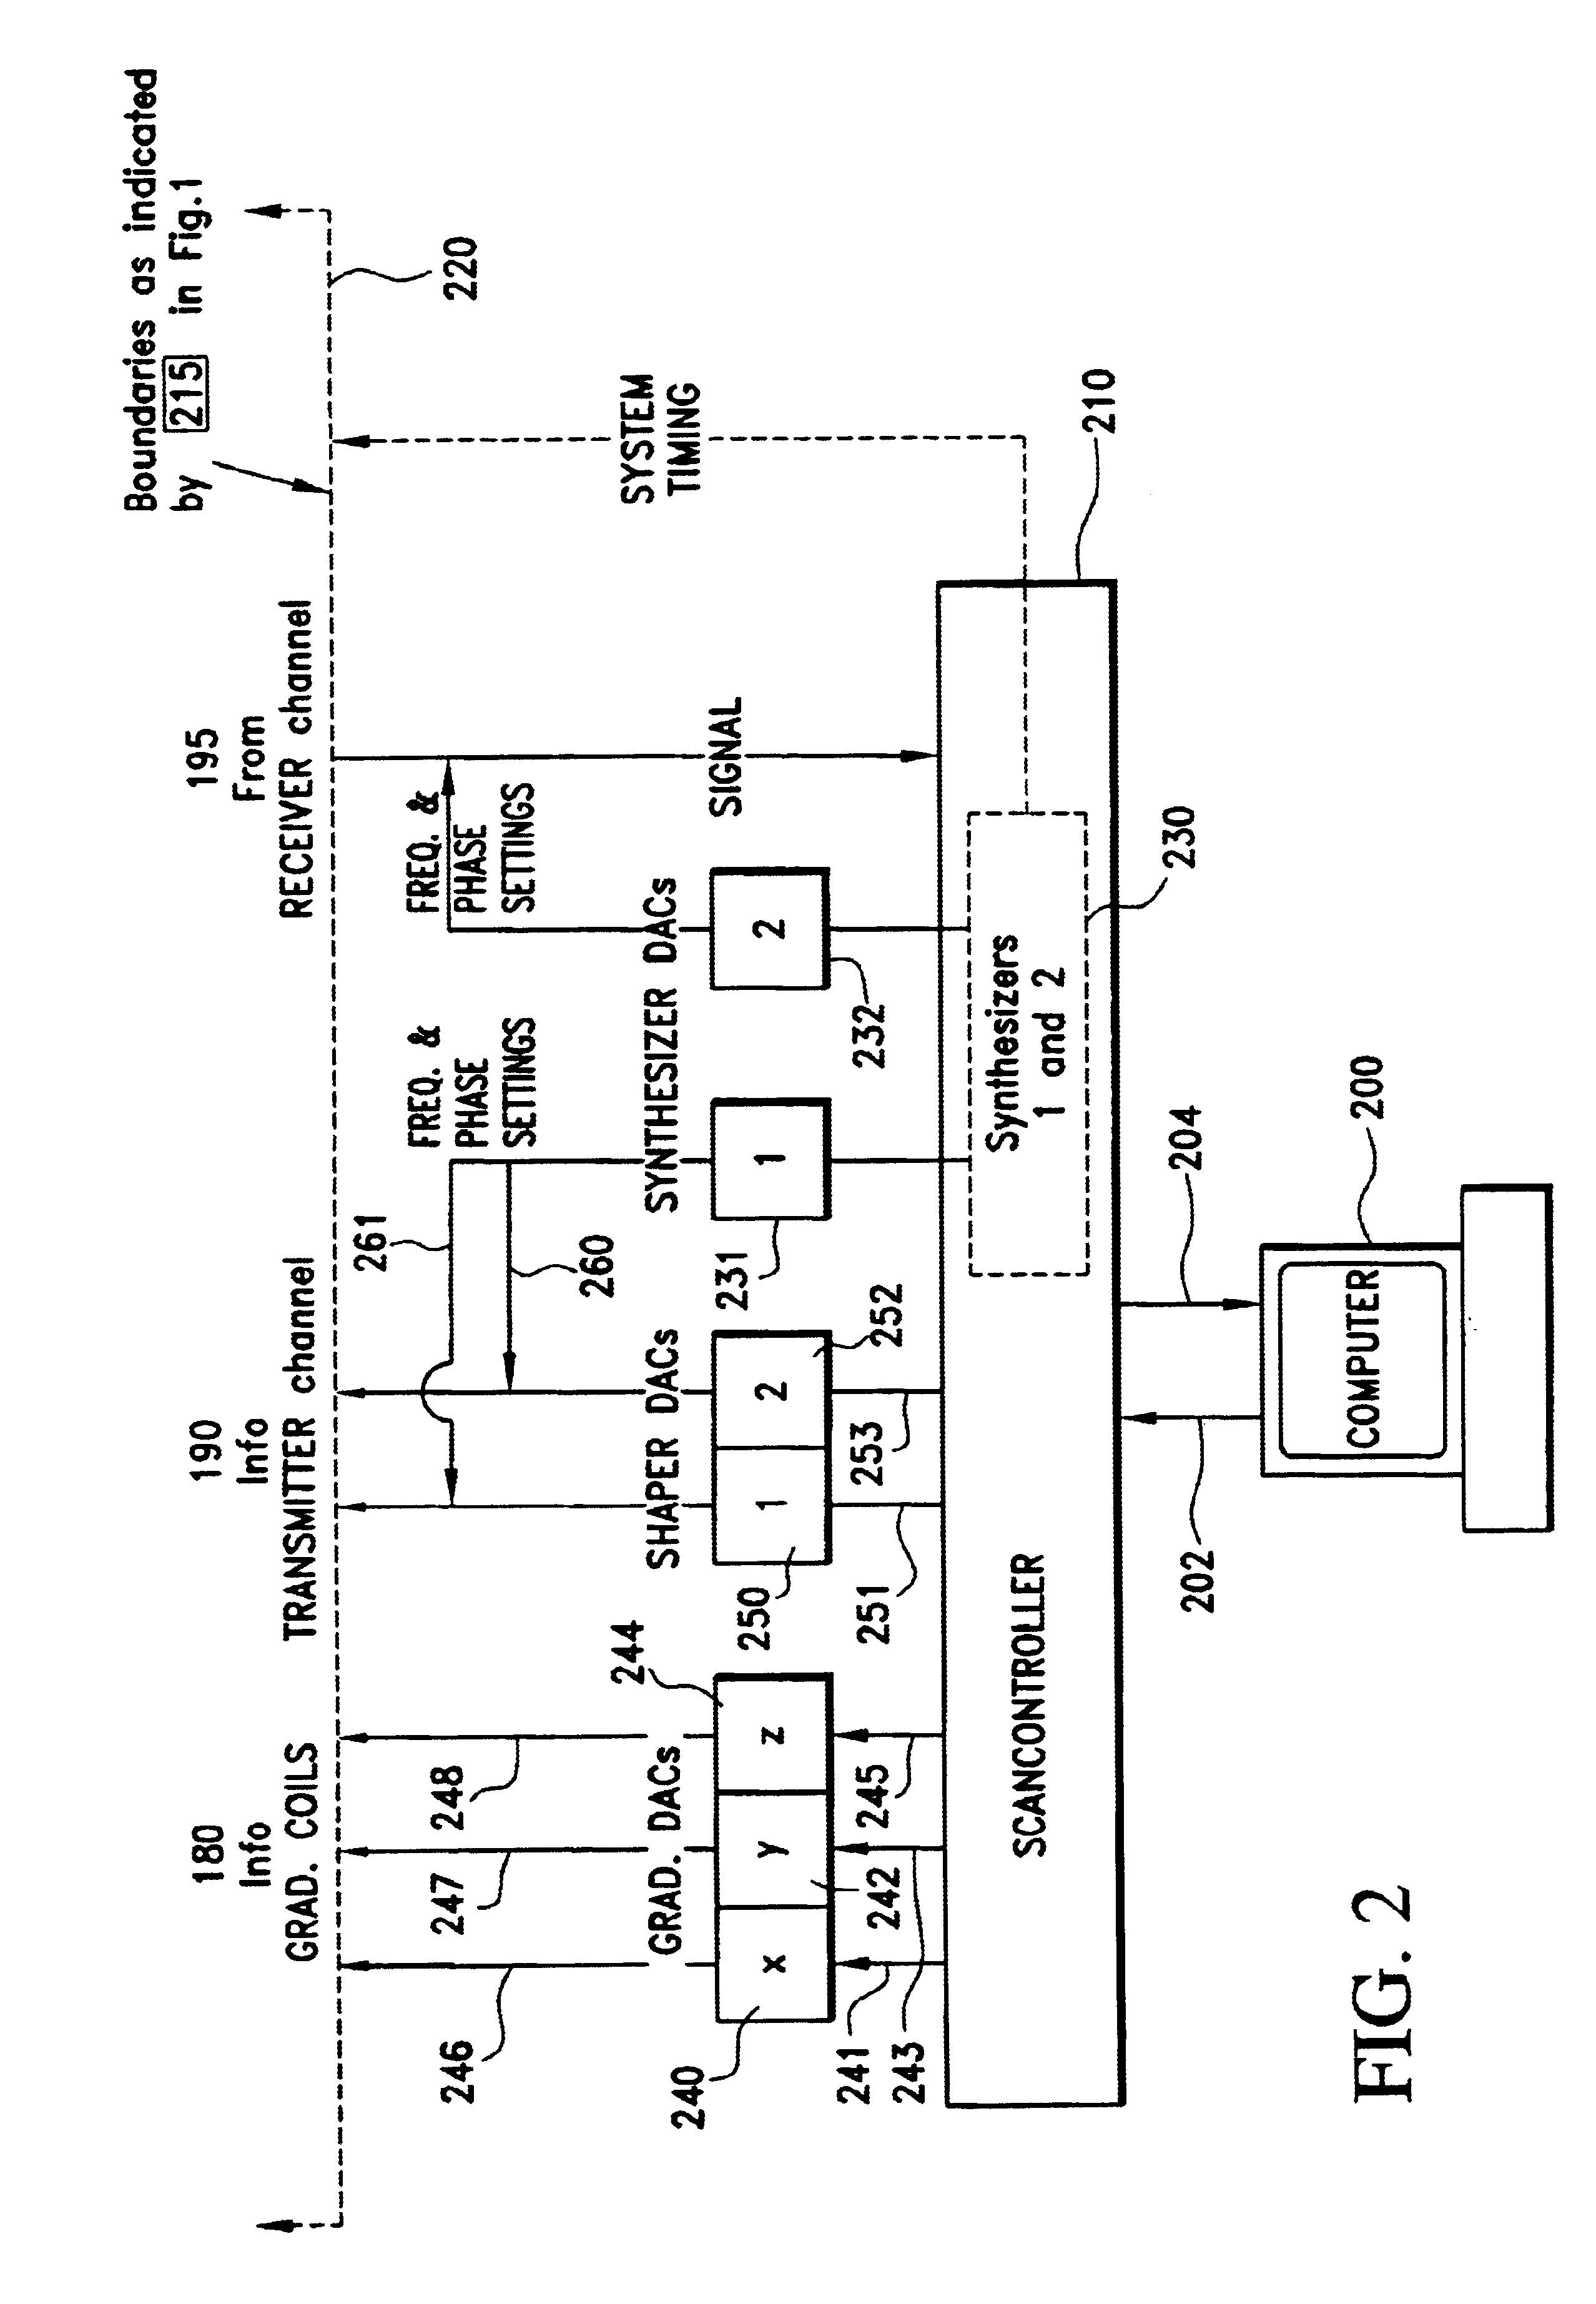 Dynamic real-time magnetic resonance imaging sequence designer